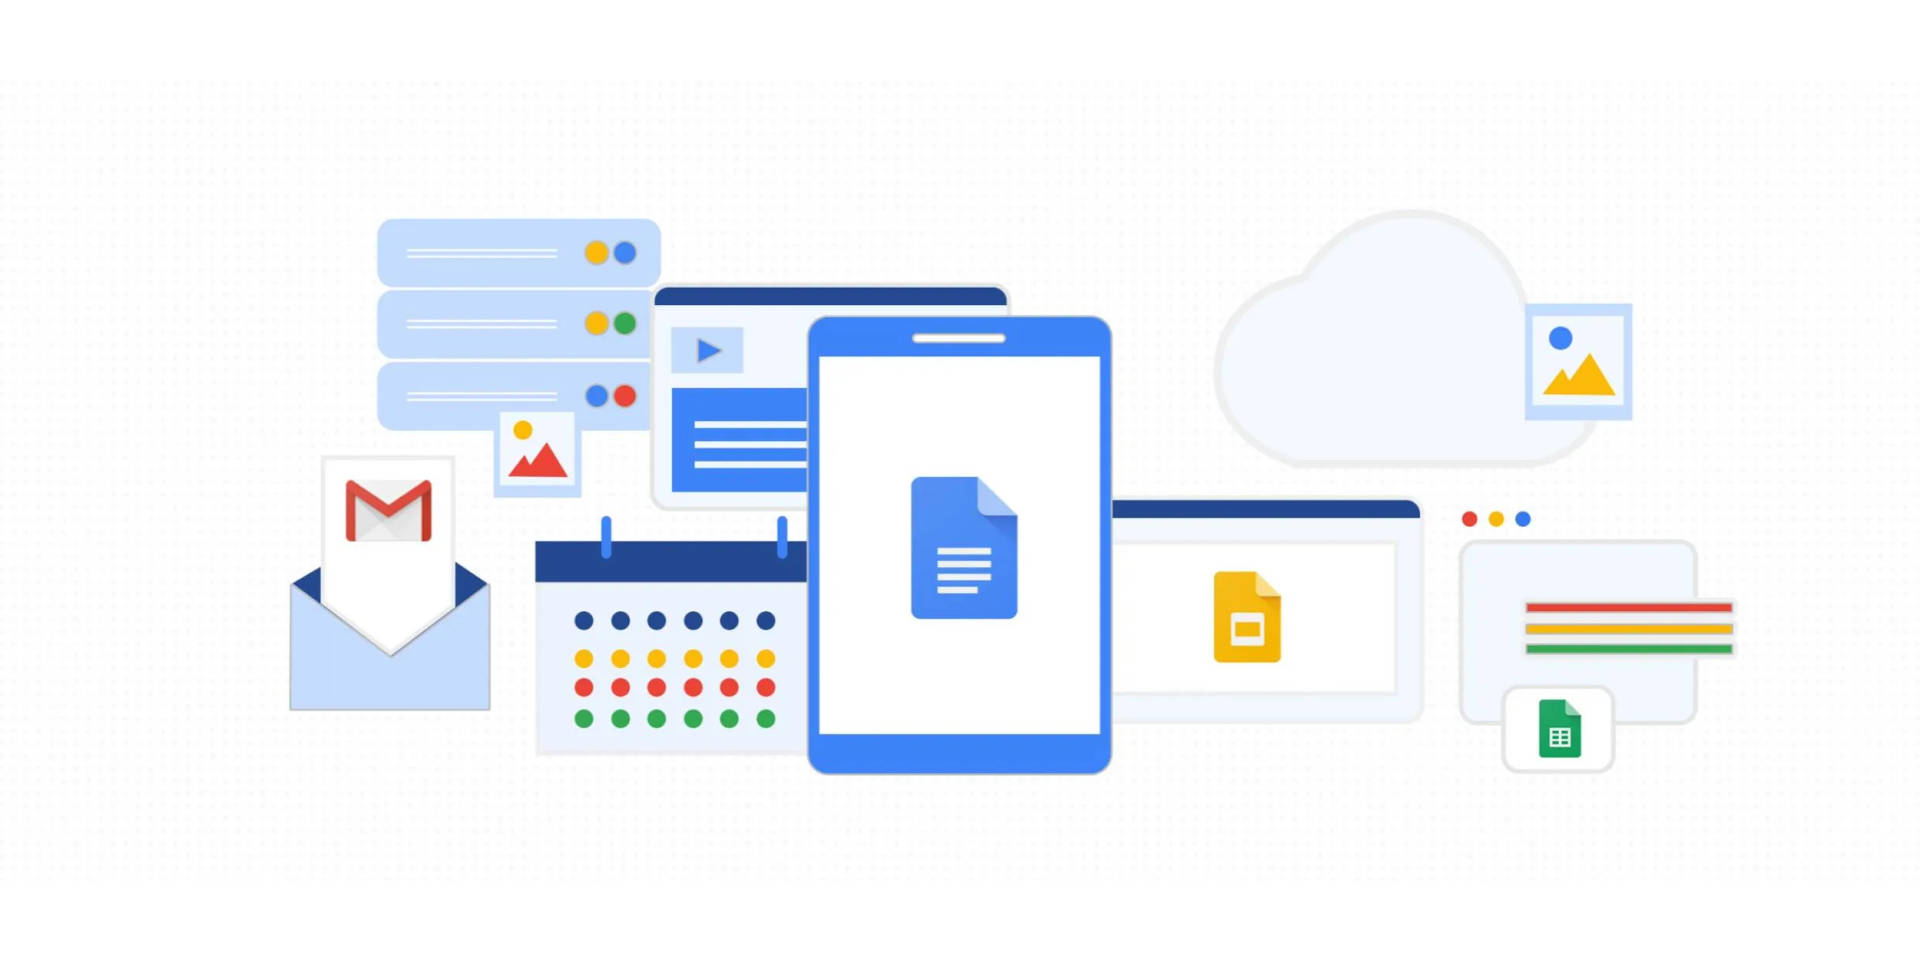 Google Docs And Other Google Apps Wallpaper